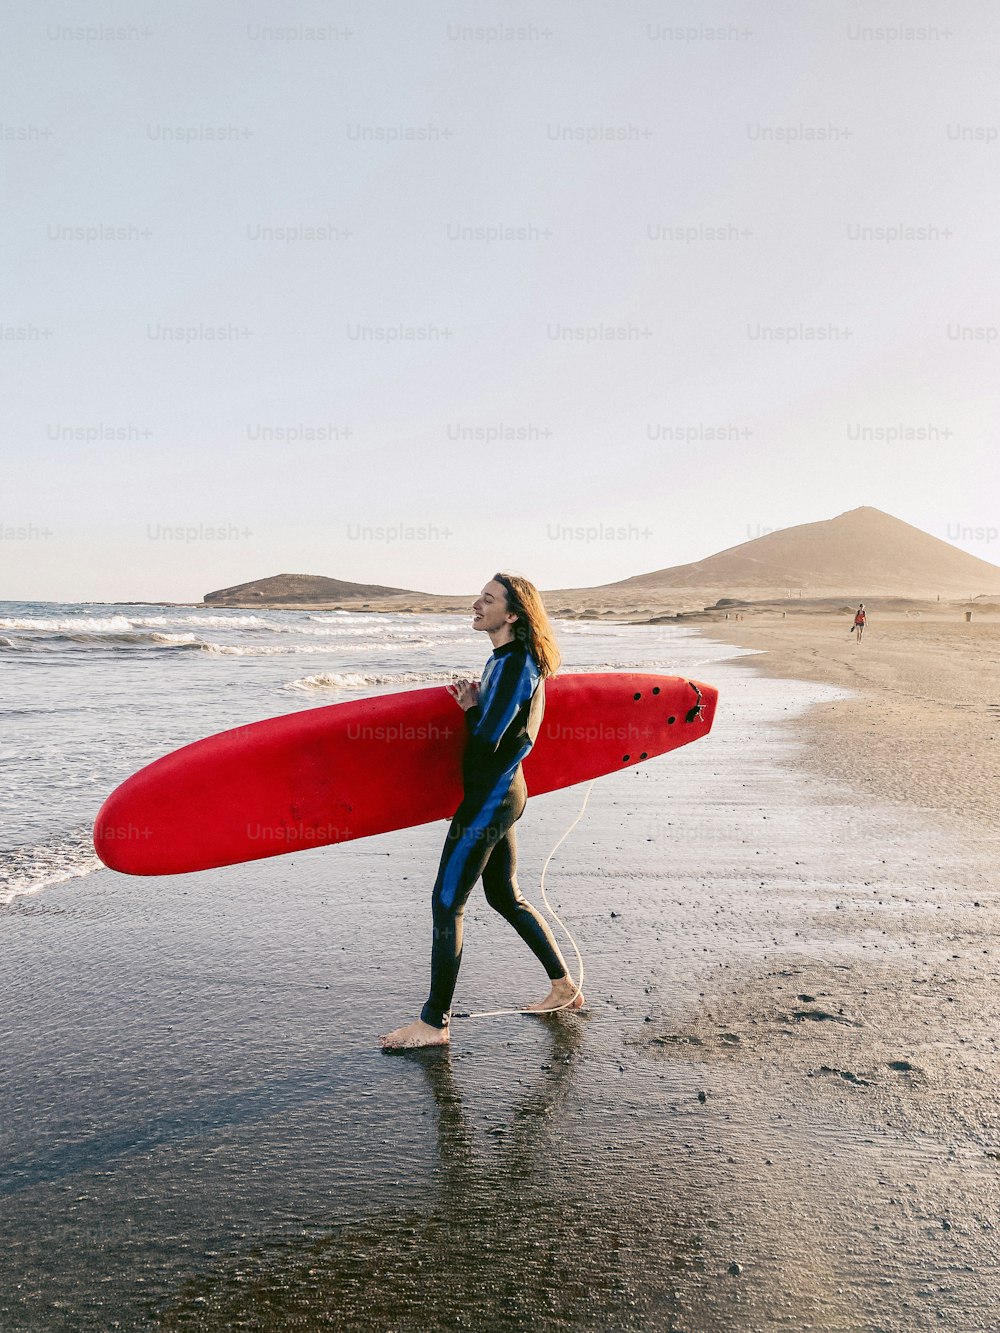 Young surfer walking with surfboard on the beach. Image made on mobile phone